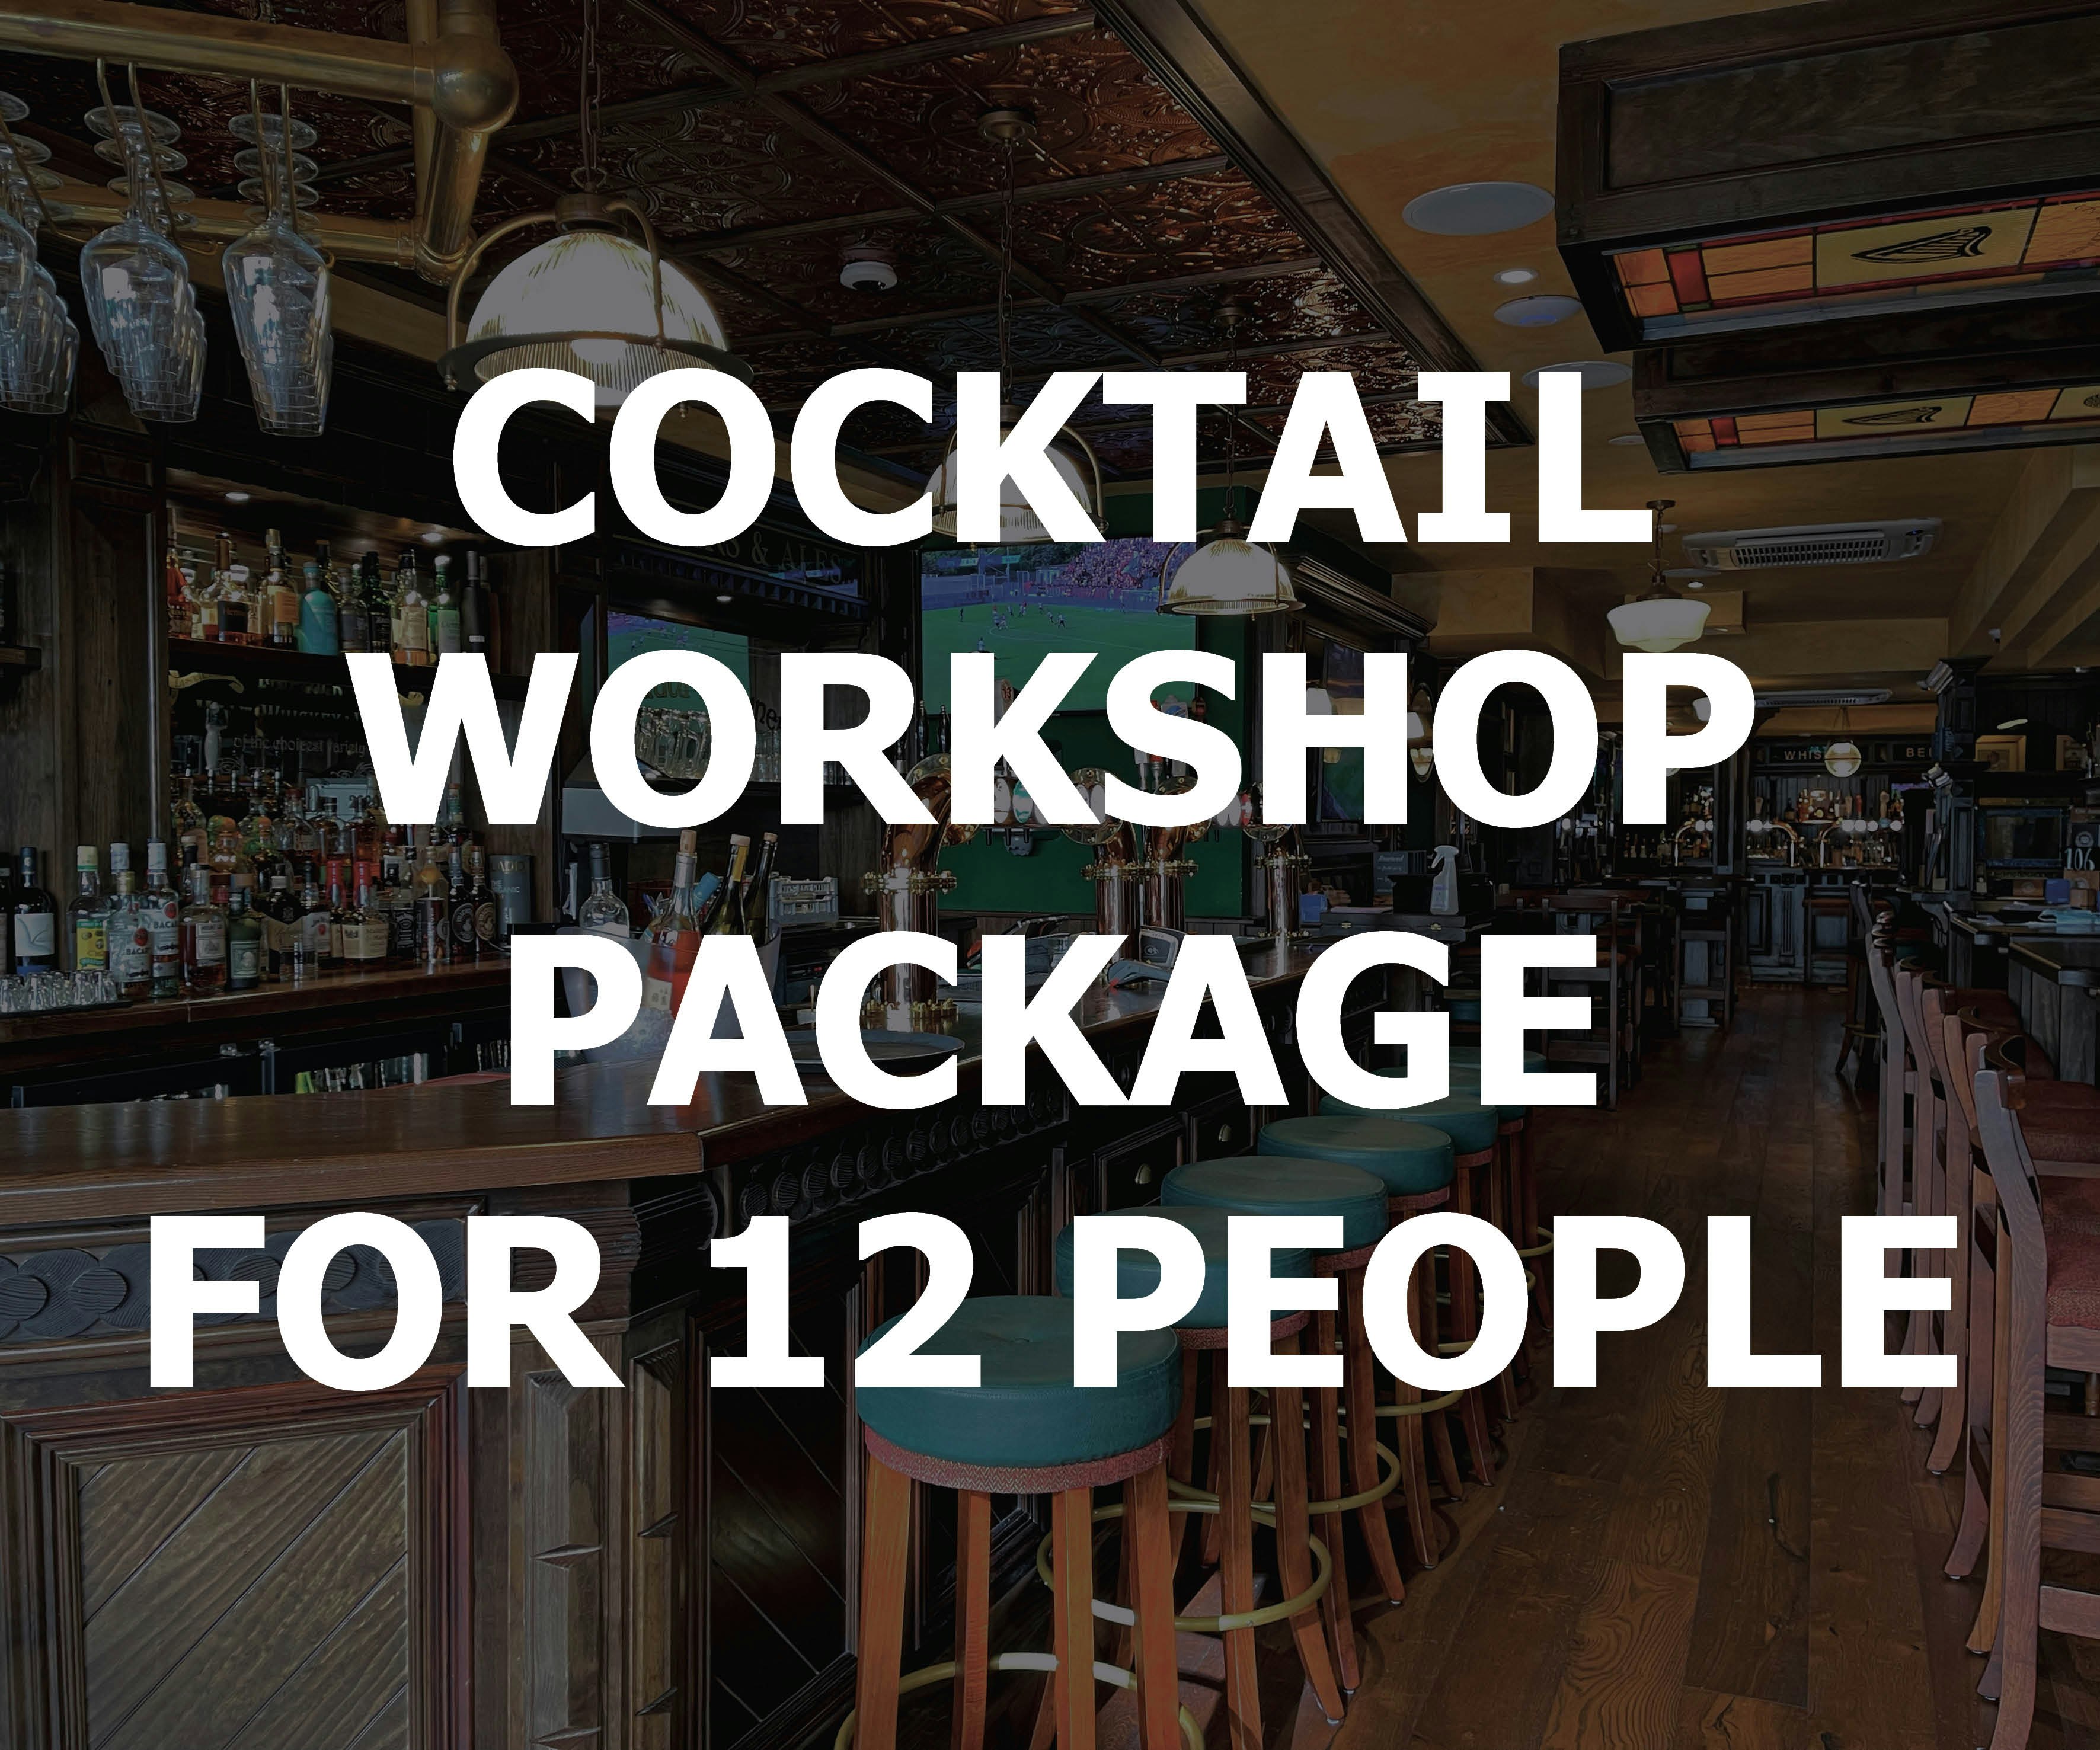 Cocktail workshop – fun course package for 12 people